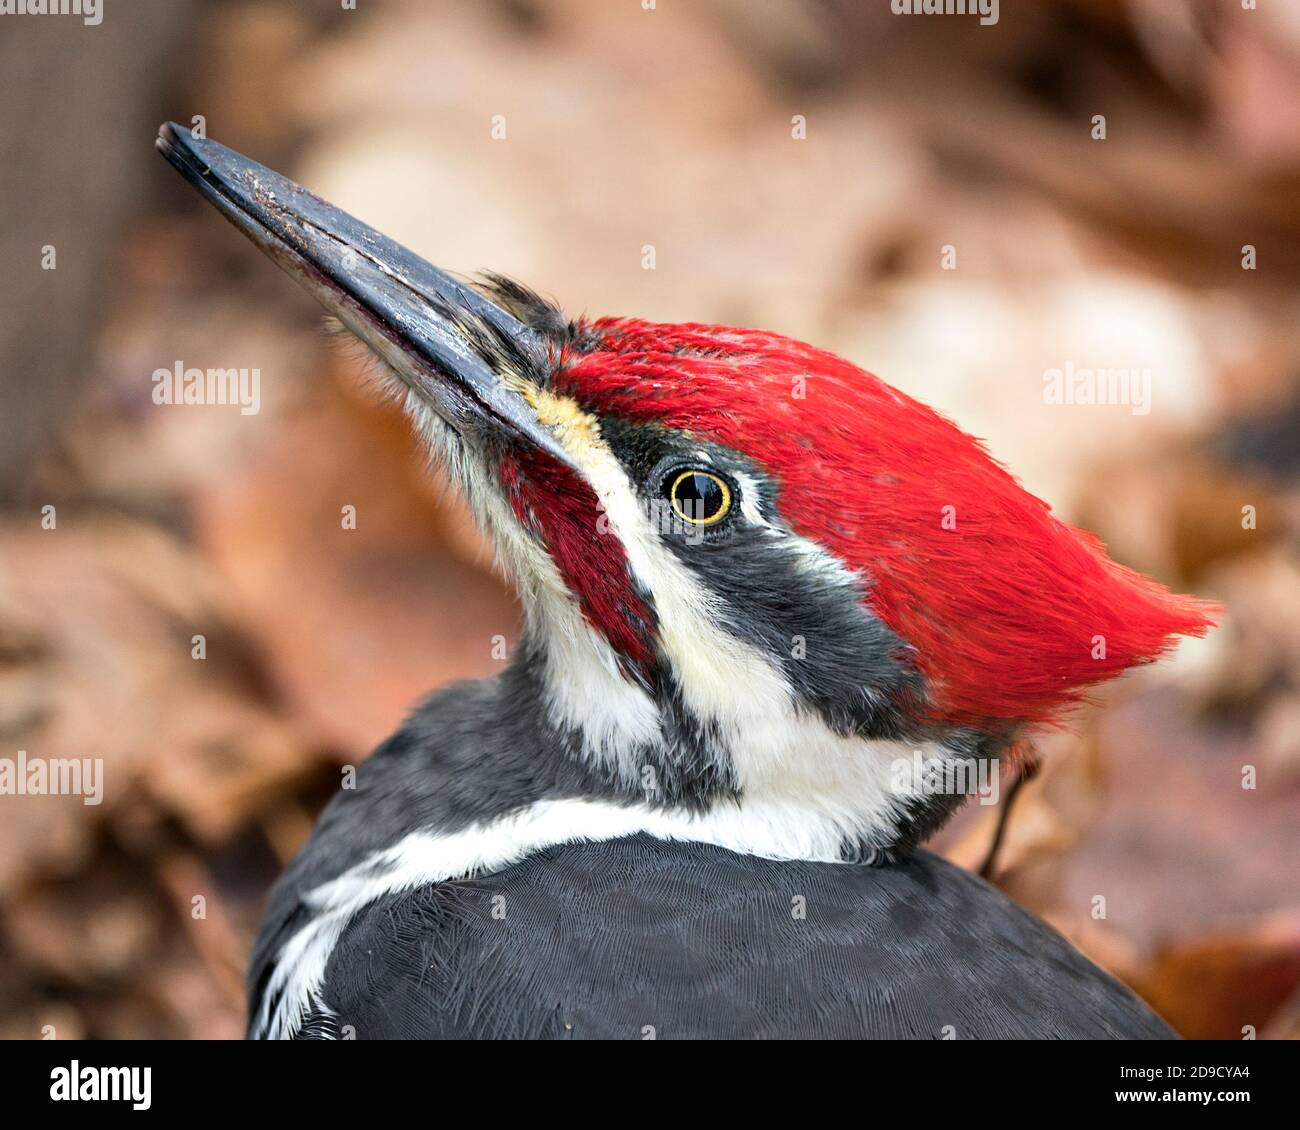 Woodpecker head close-up profile view with a brown leaves background in its environment and habitat. Stock Photo